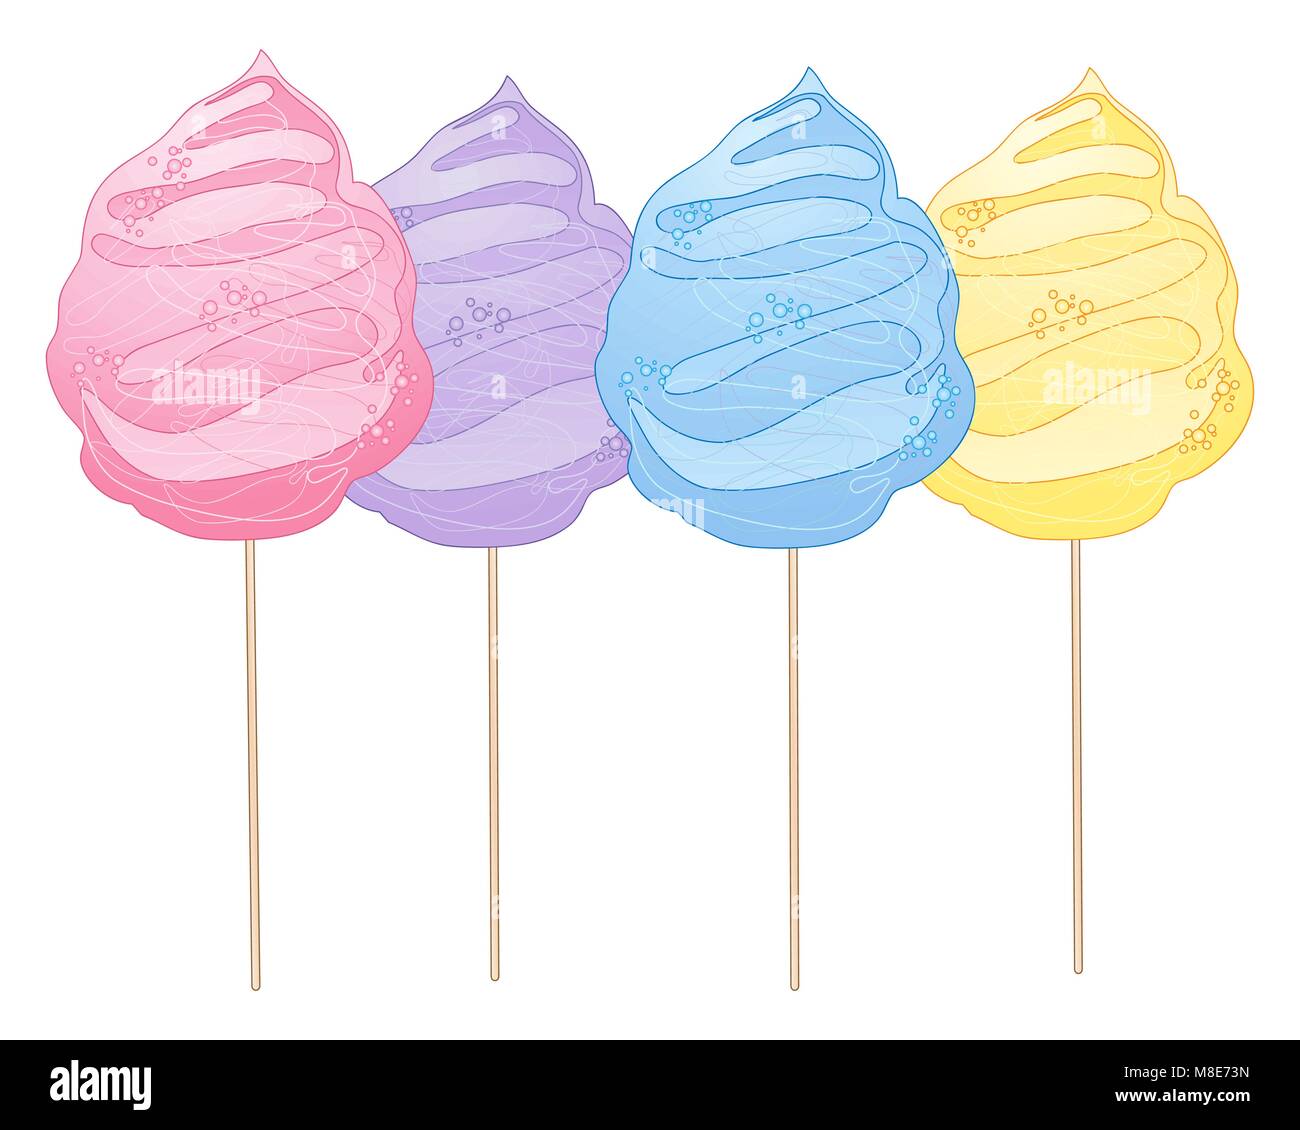 a vector illustration in eps 10 format of four cotton candy treats in bright colors in advertisment format on a white background Stock Vector